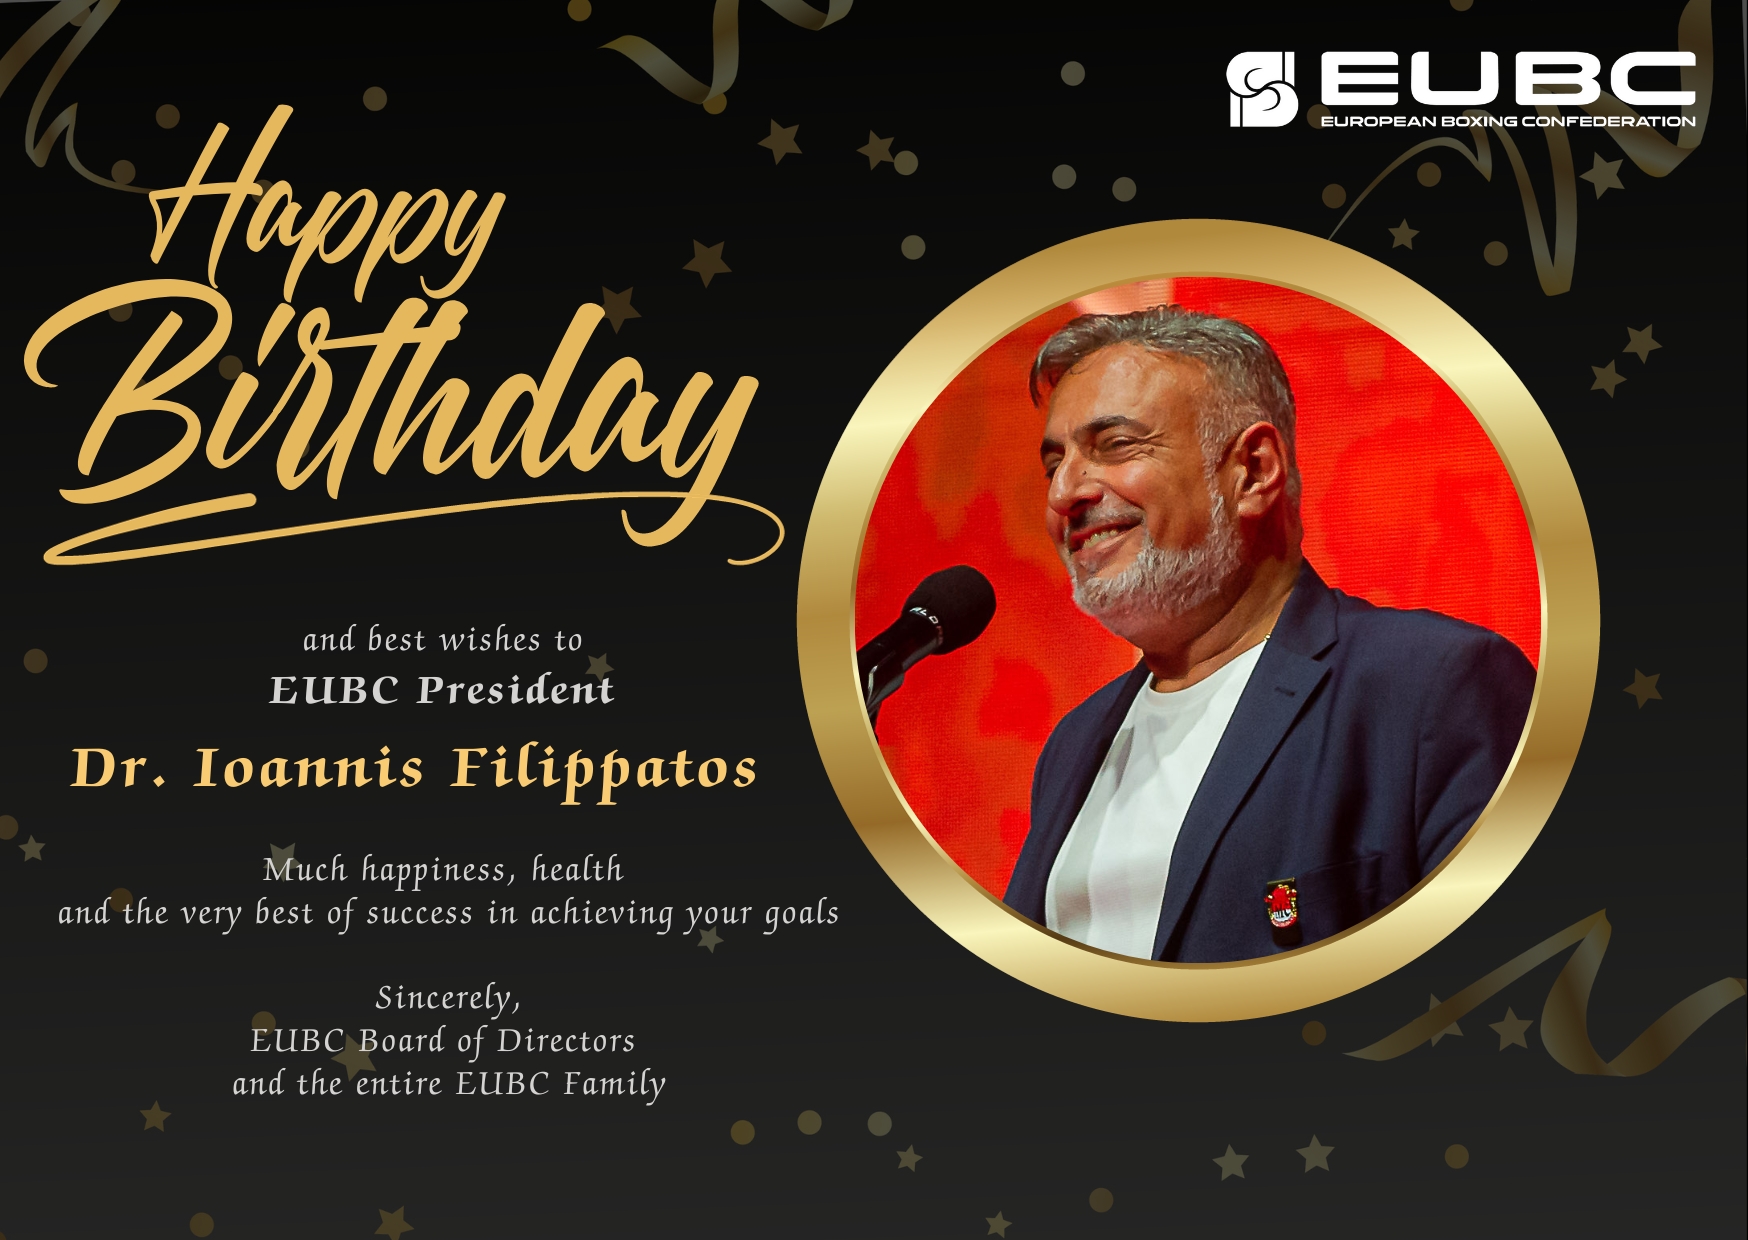 Happy Birthday and best wishes toEUBC President Dr. Ioannis Filippatos!